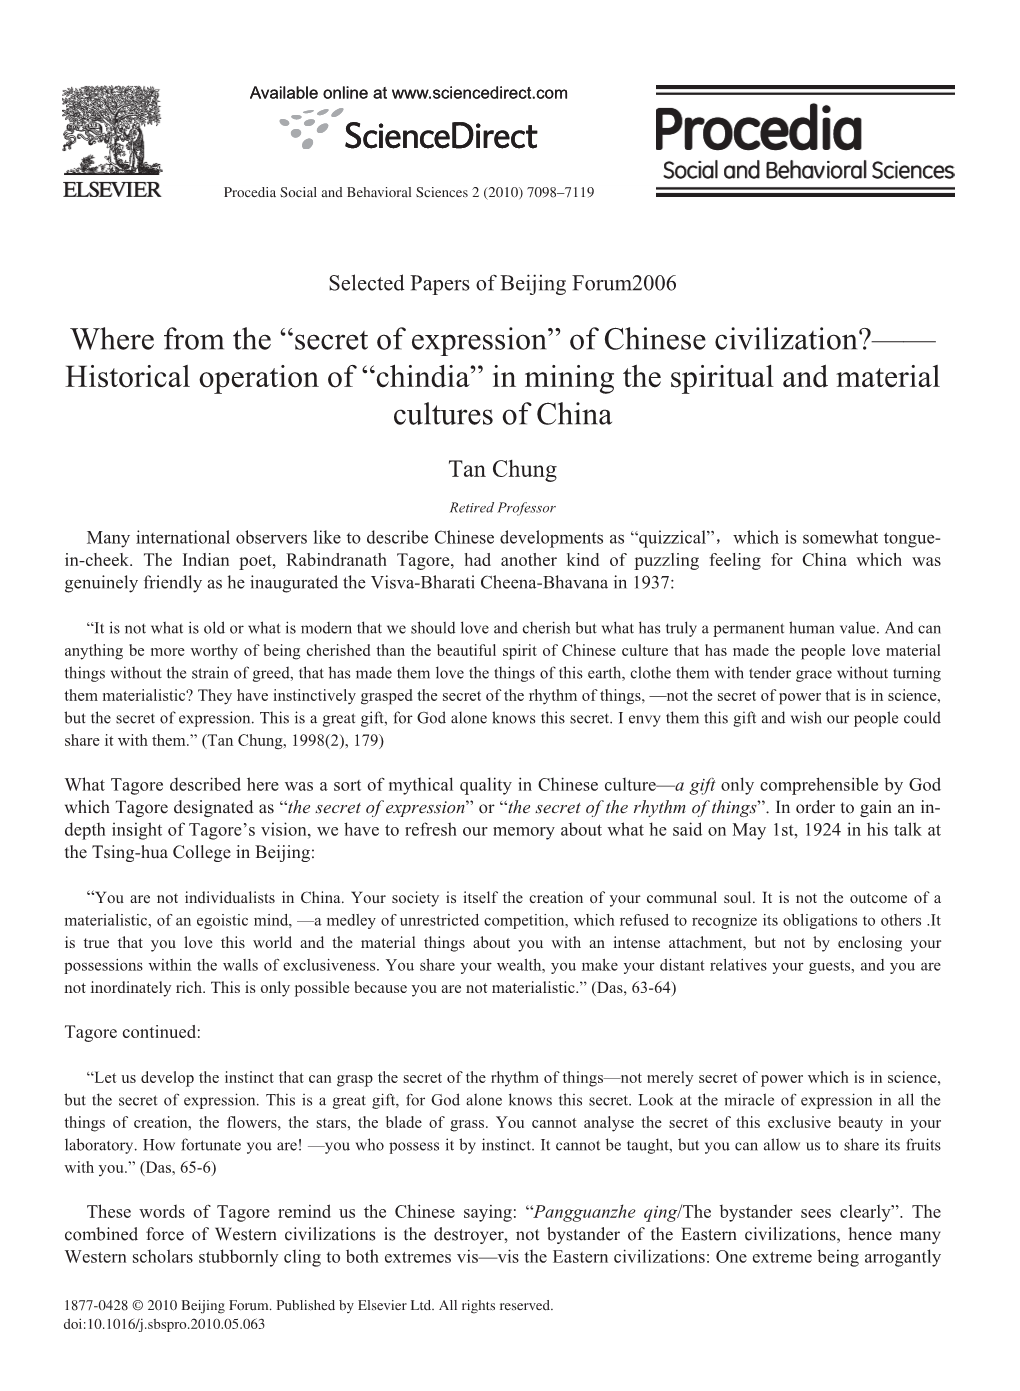 Of Chinese Civilization?—— Historical Operation of “Chindia” in Mining the Spiritual and Material Cultures of China